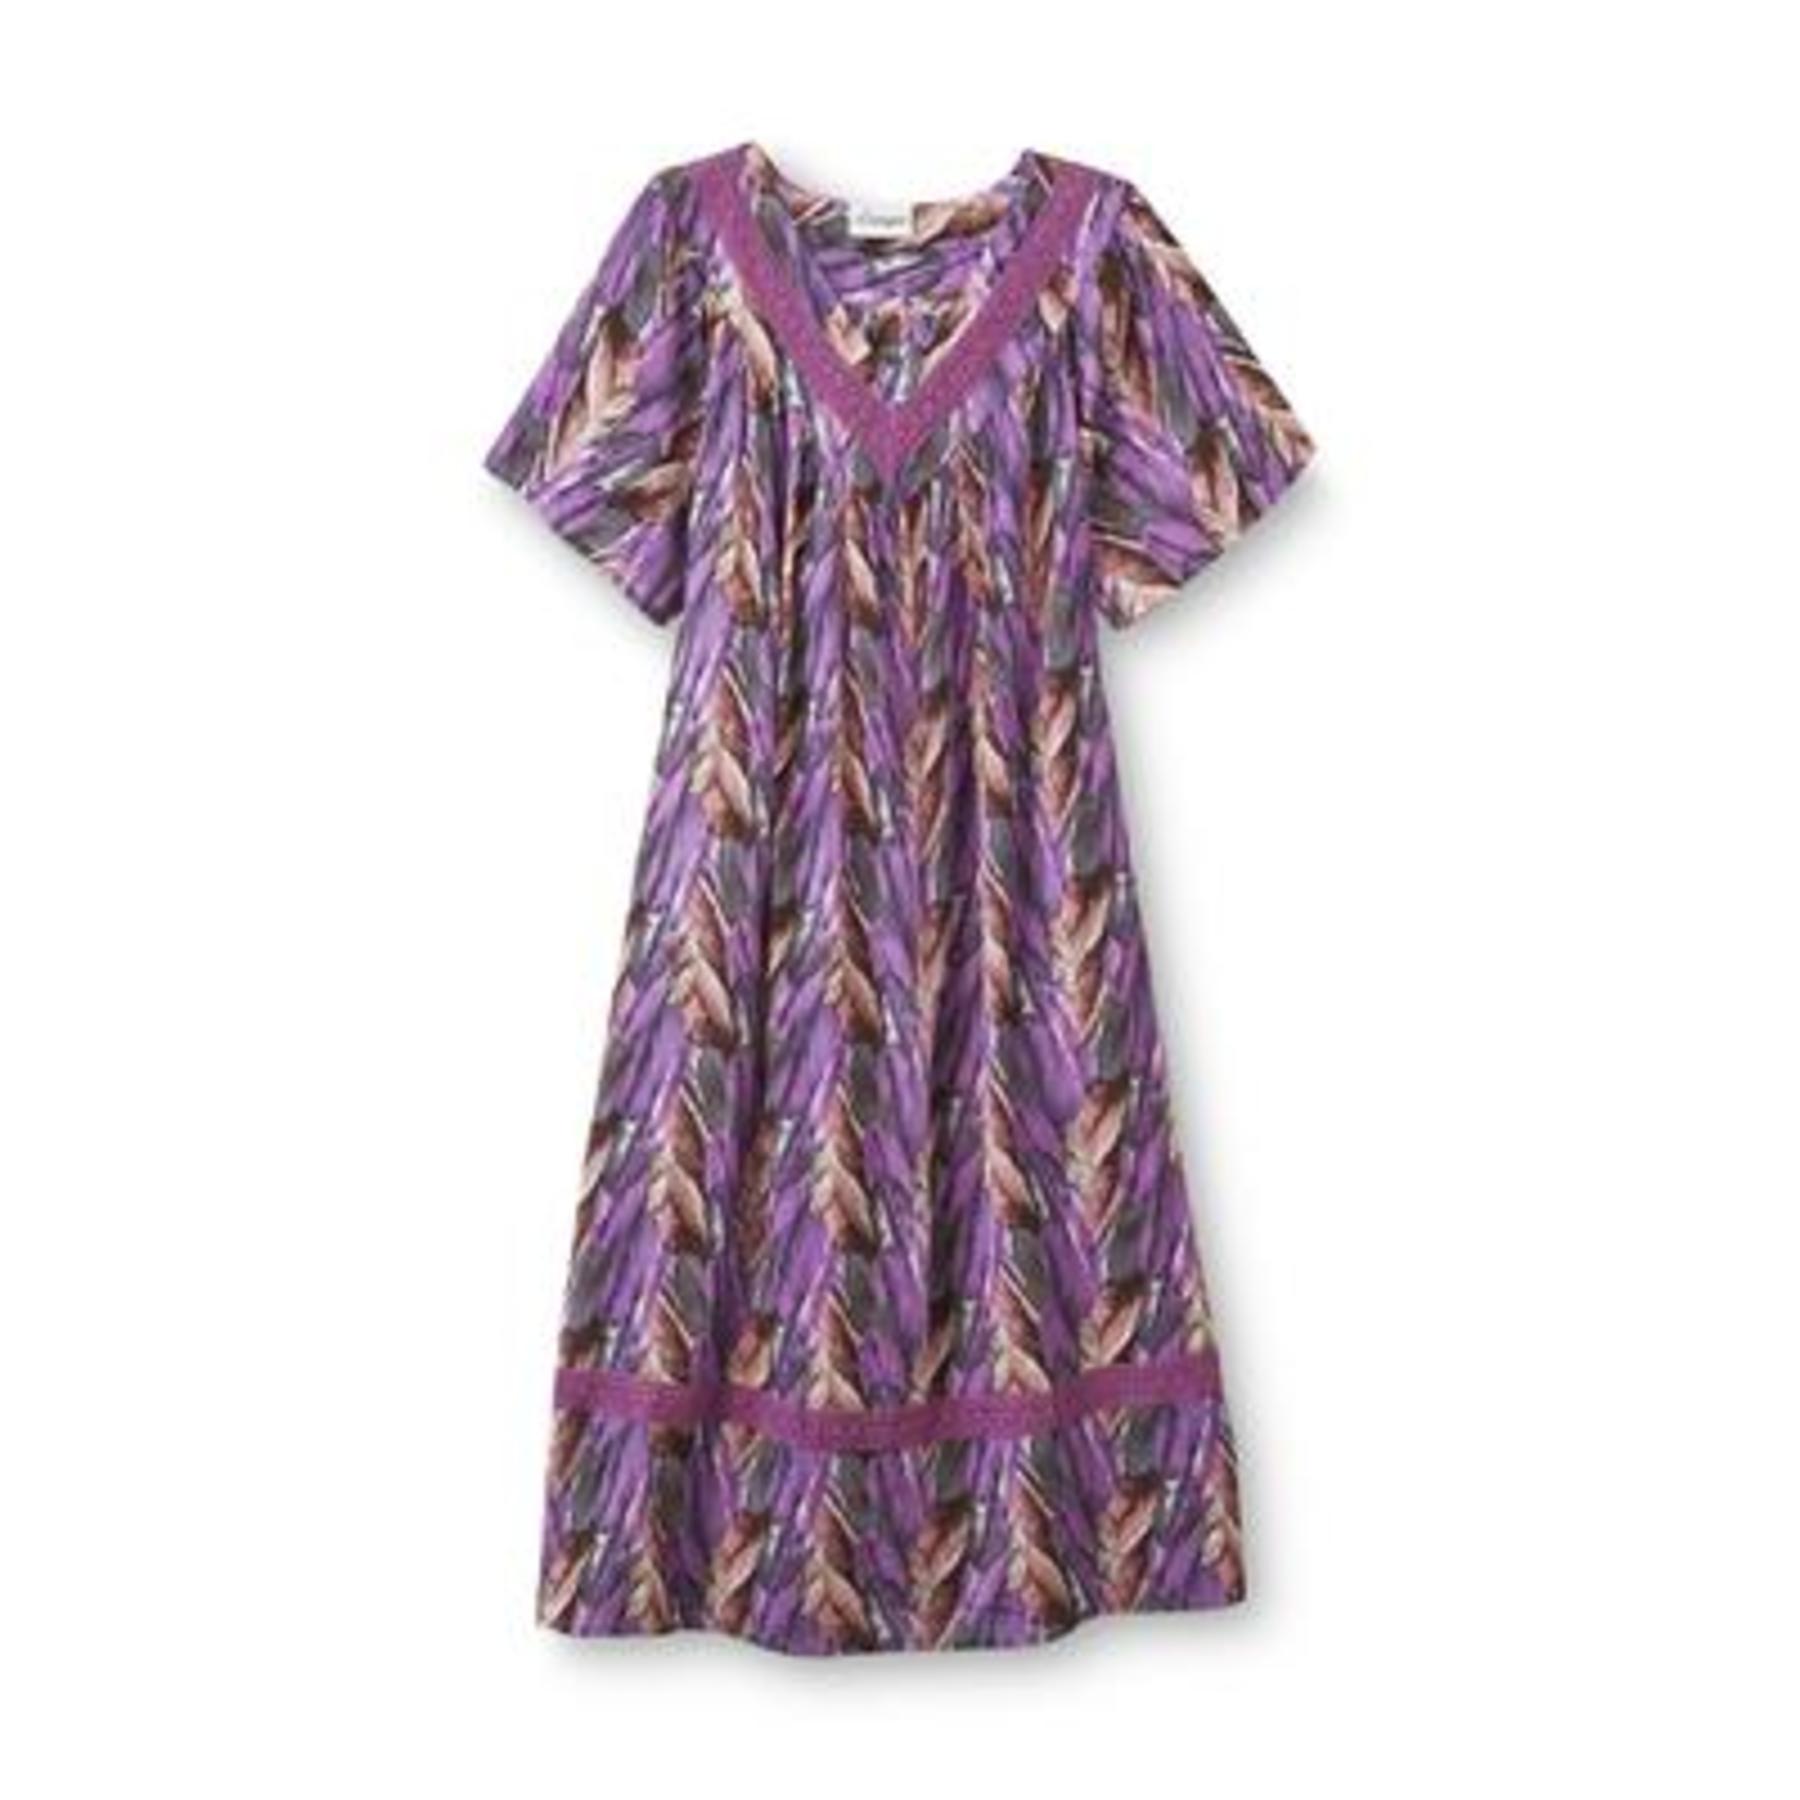 Loungees Women's Plus Lounge Dress - Feather Print